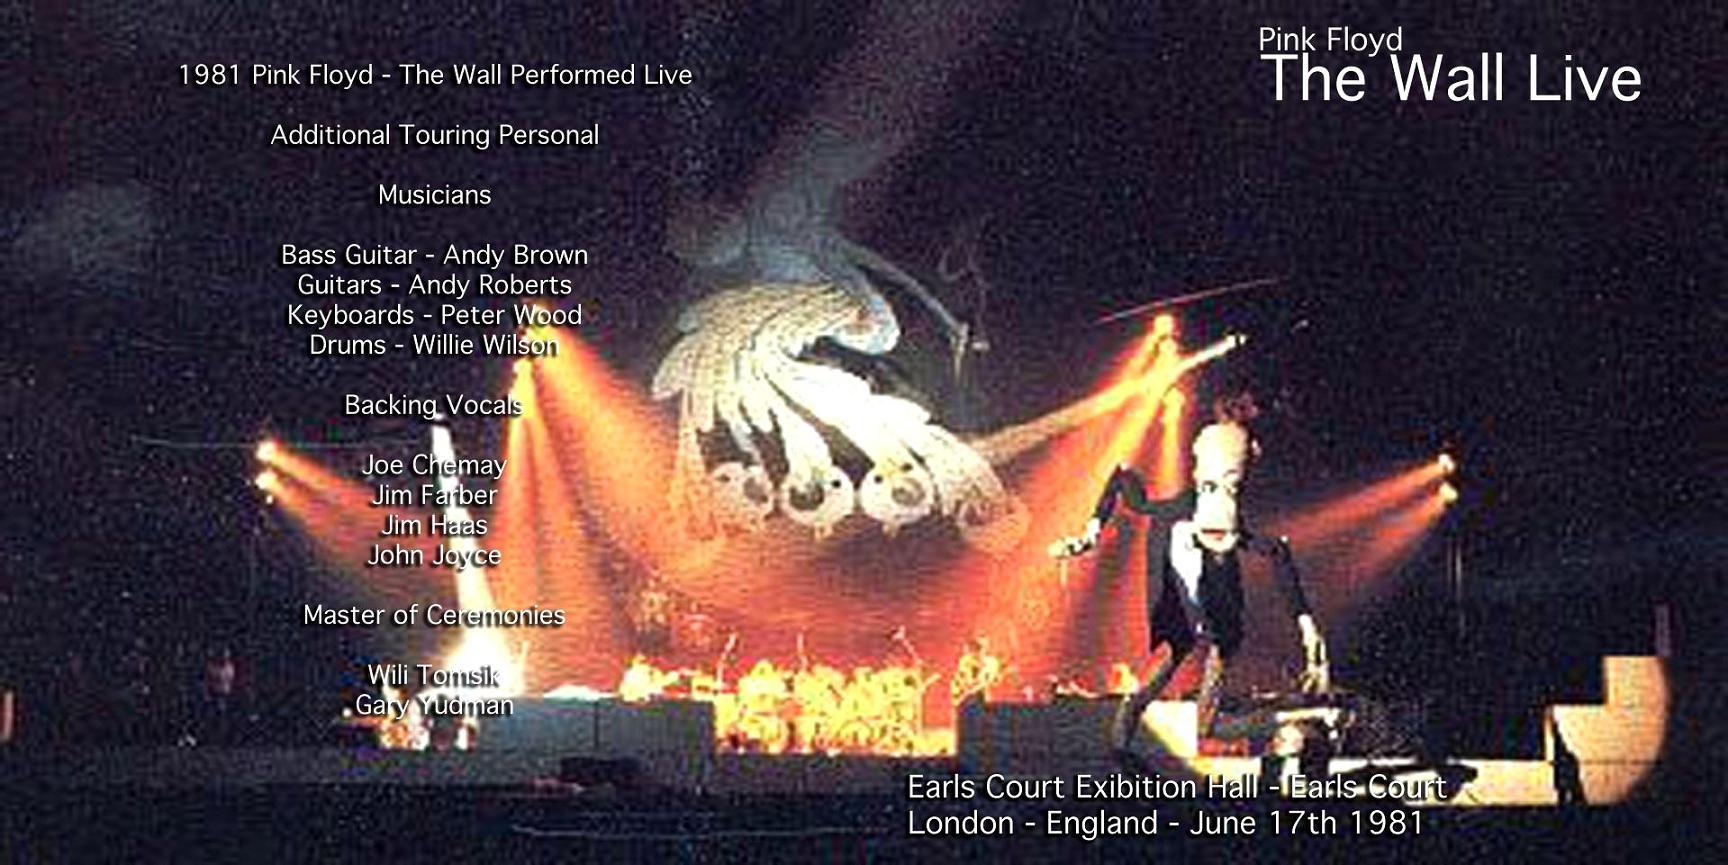 1981-06-17-Live_Wall_Earl's_court-front